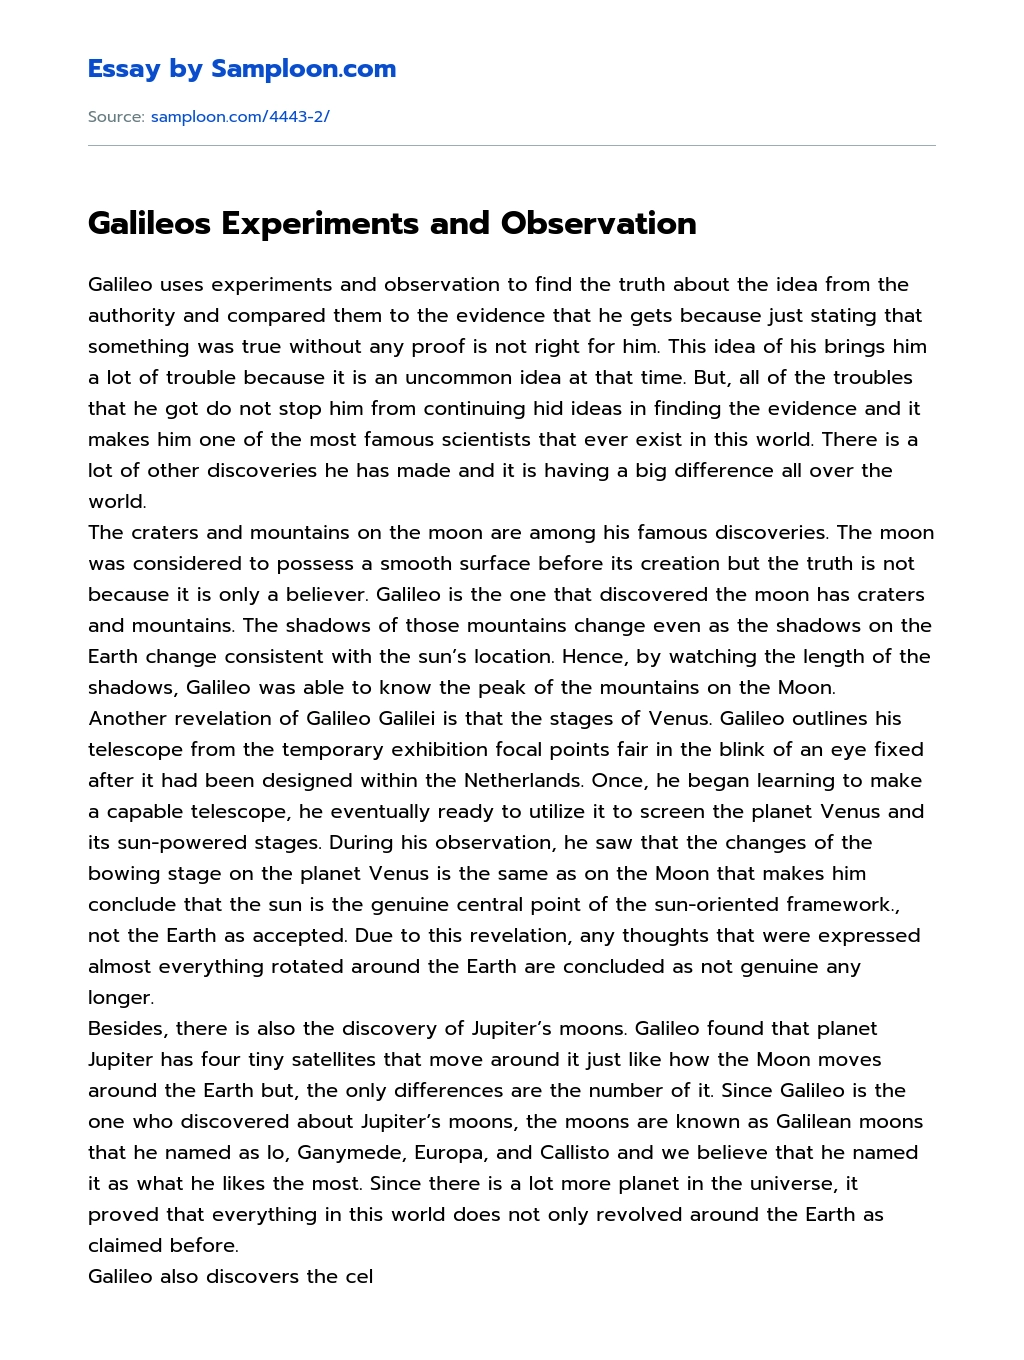 Galileos Experiments and Observation essay